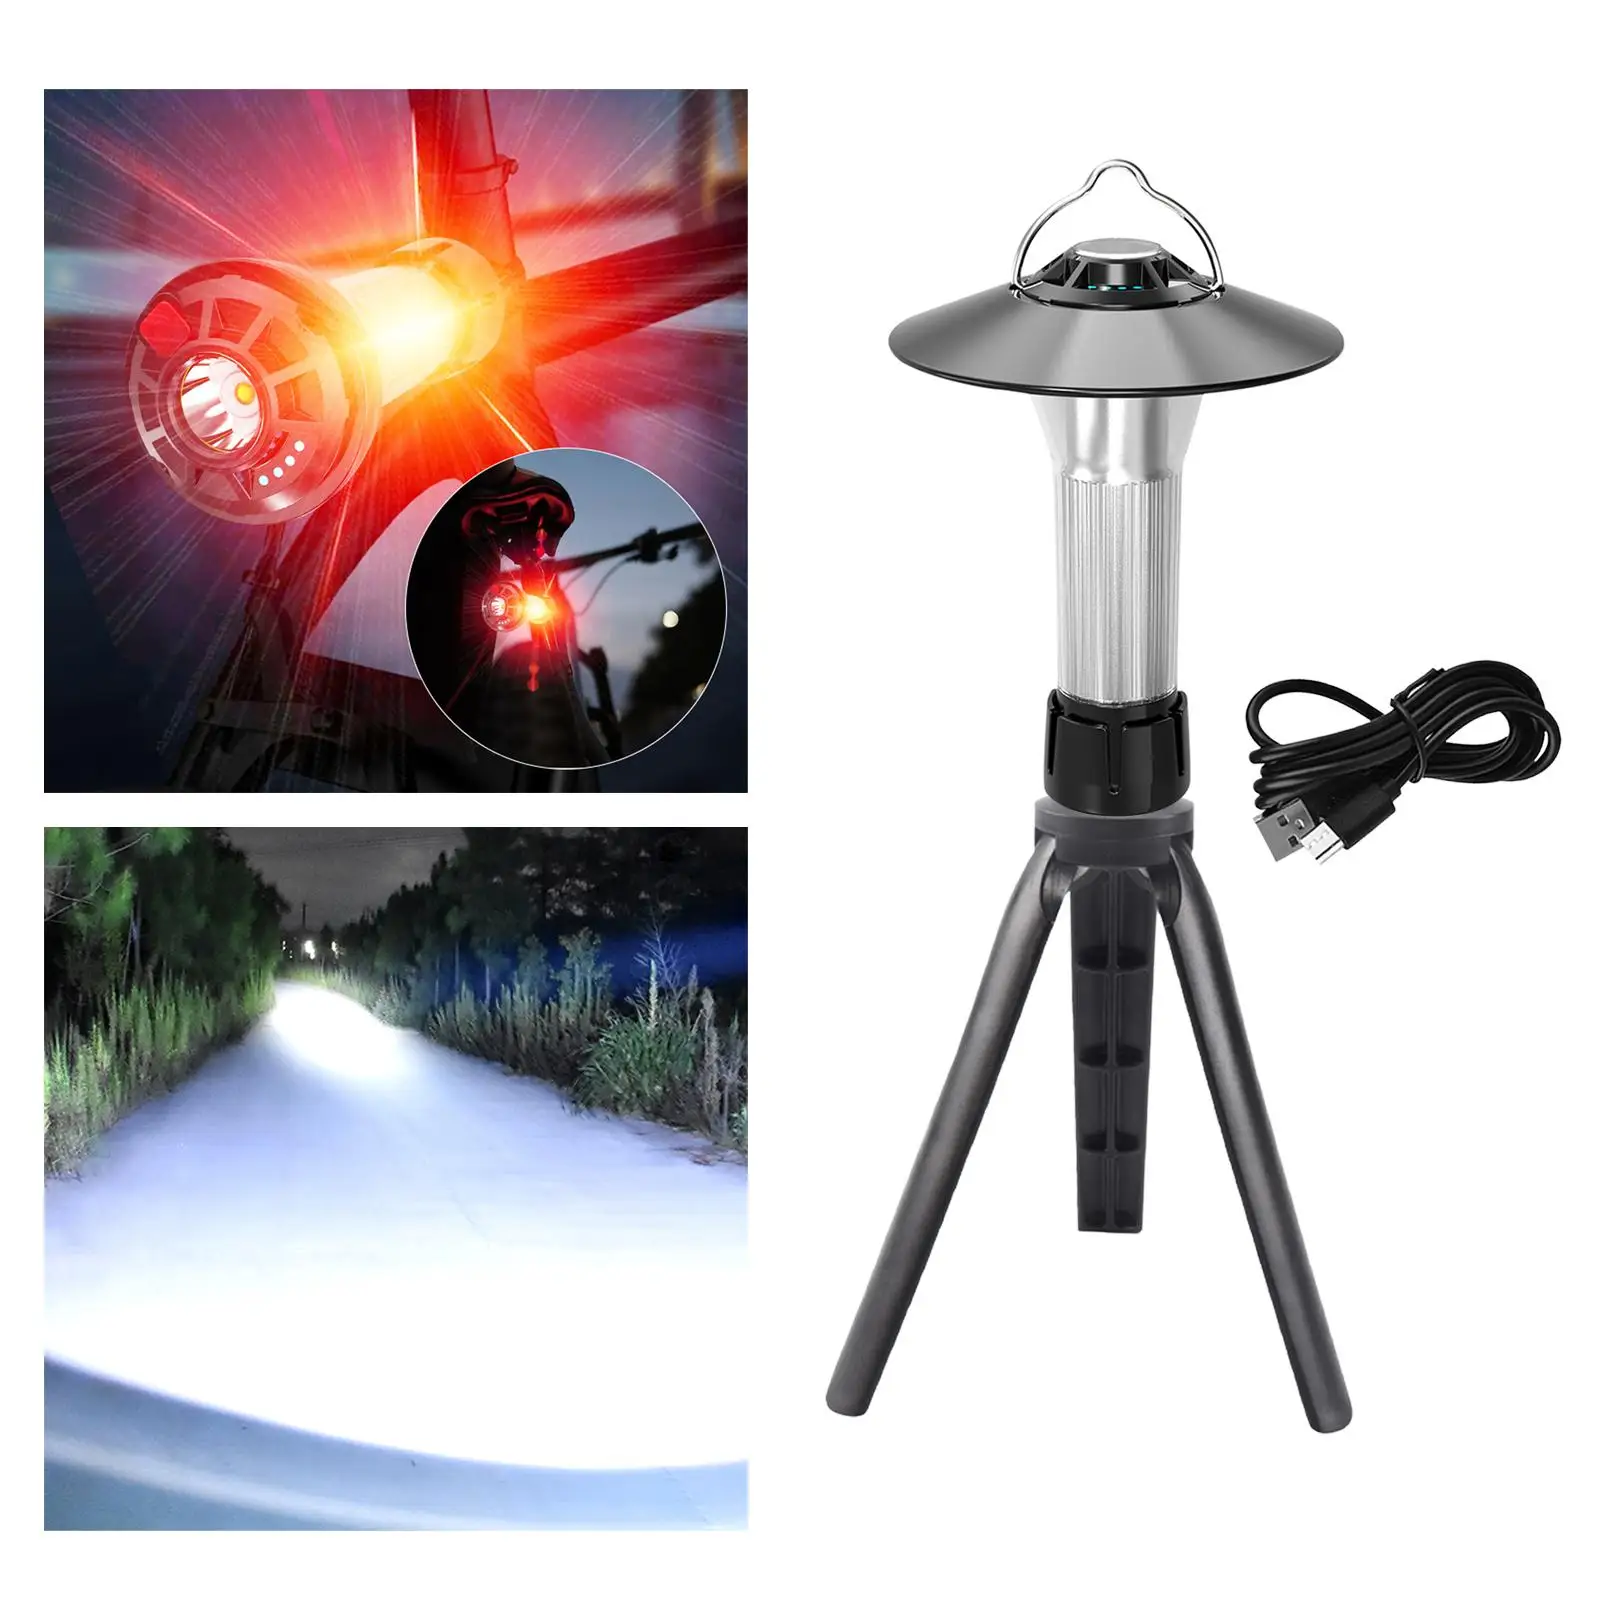 Outdoor Camping Flashlight Backpacking Hiking Emergency Light